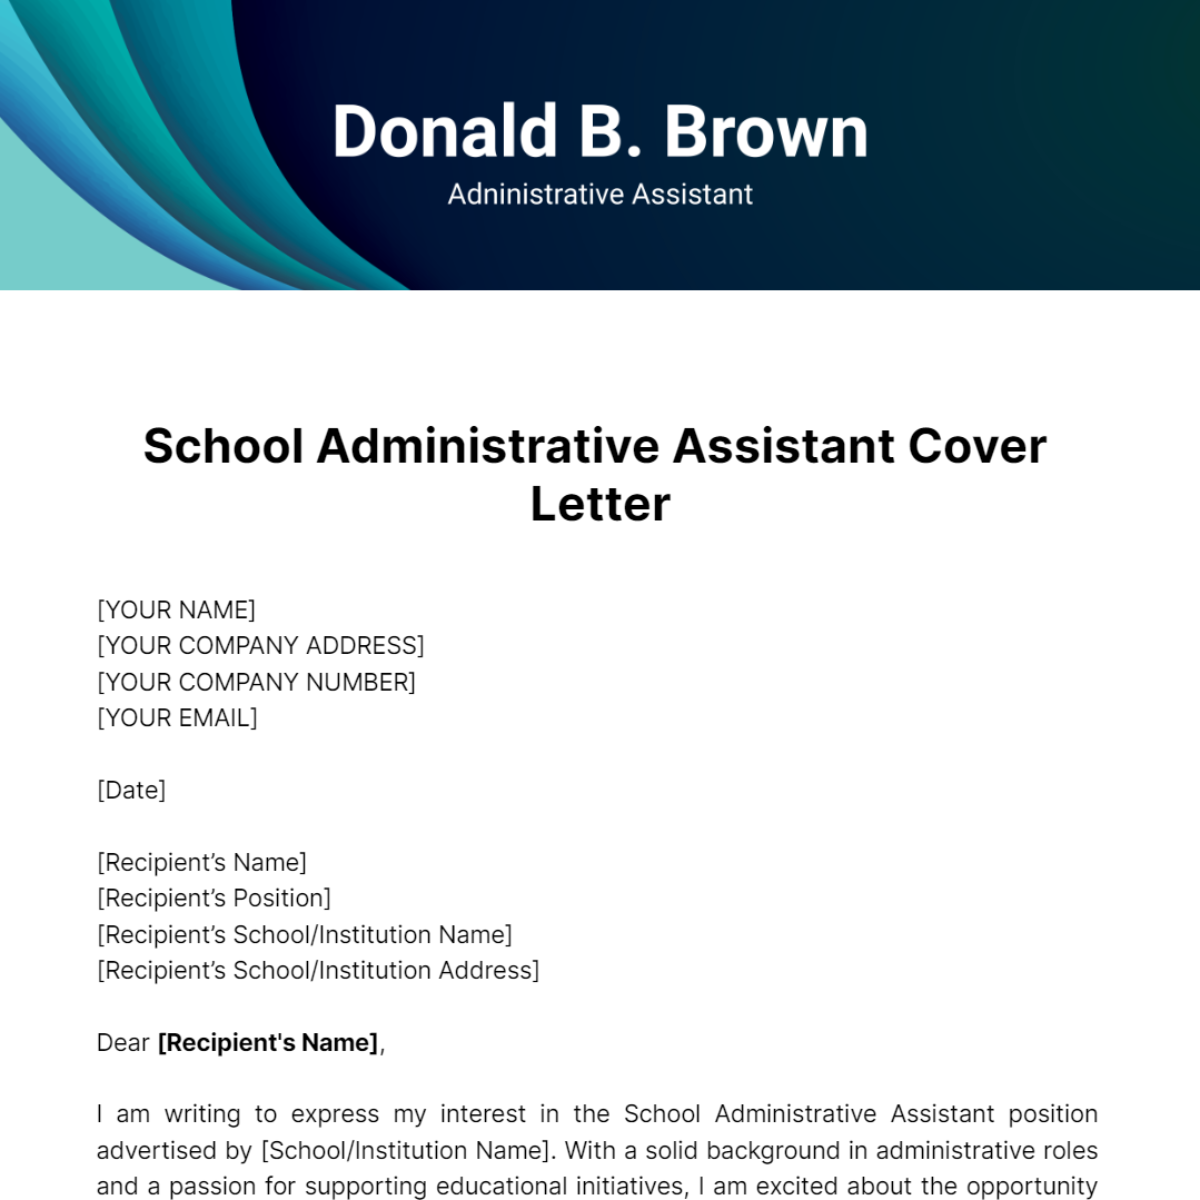 School Administrative Assistant Cover Letter Template